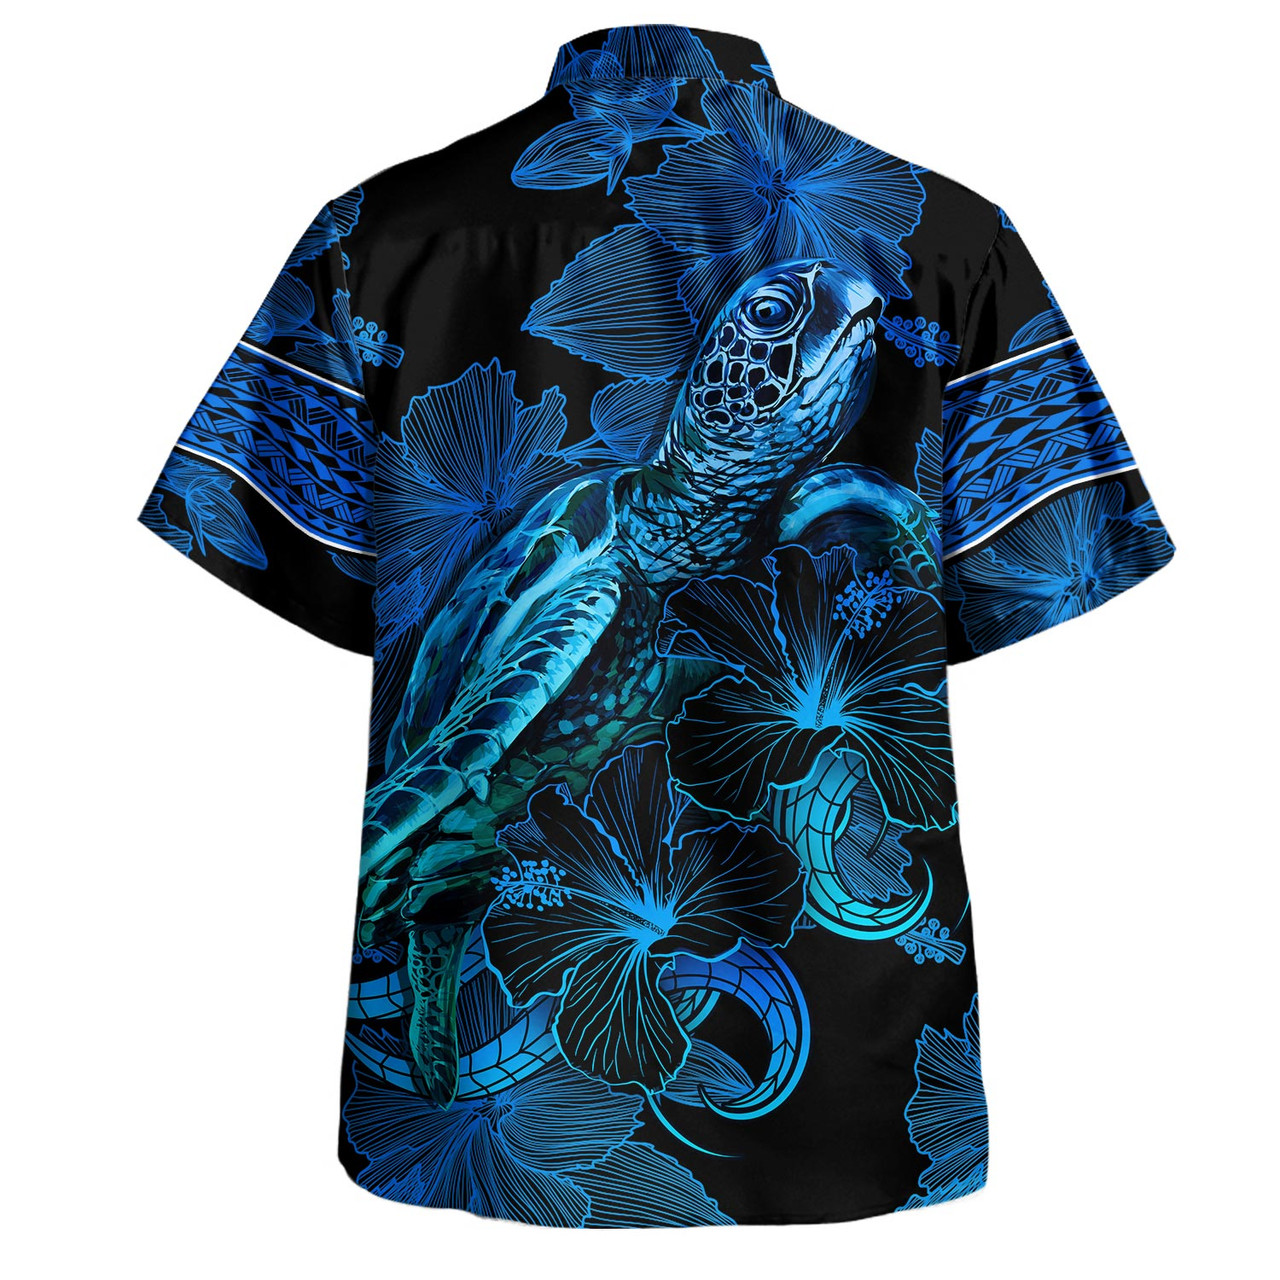 Federated States Of Micronesia Combo Short Sleeve Dress And Shirt Sea Turtle With Blooming Hibiscus Flowers Tribal Blue